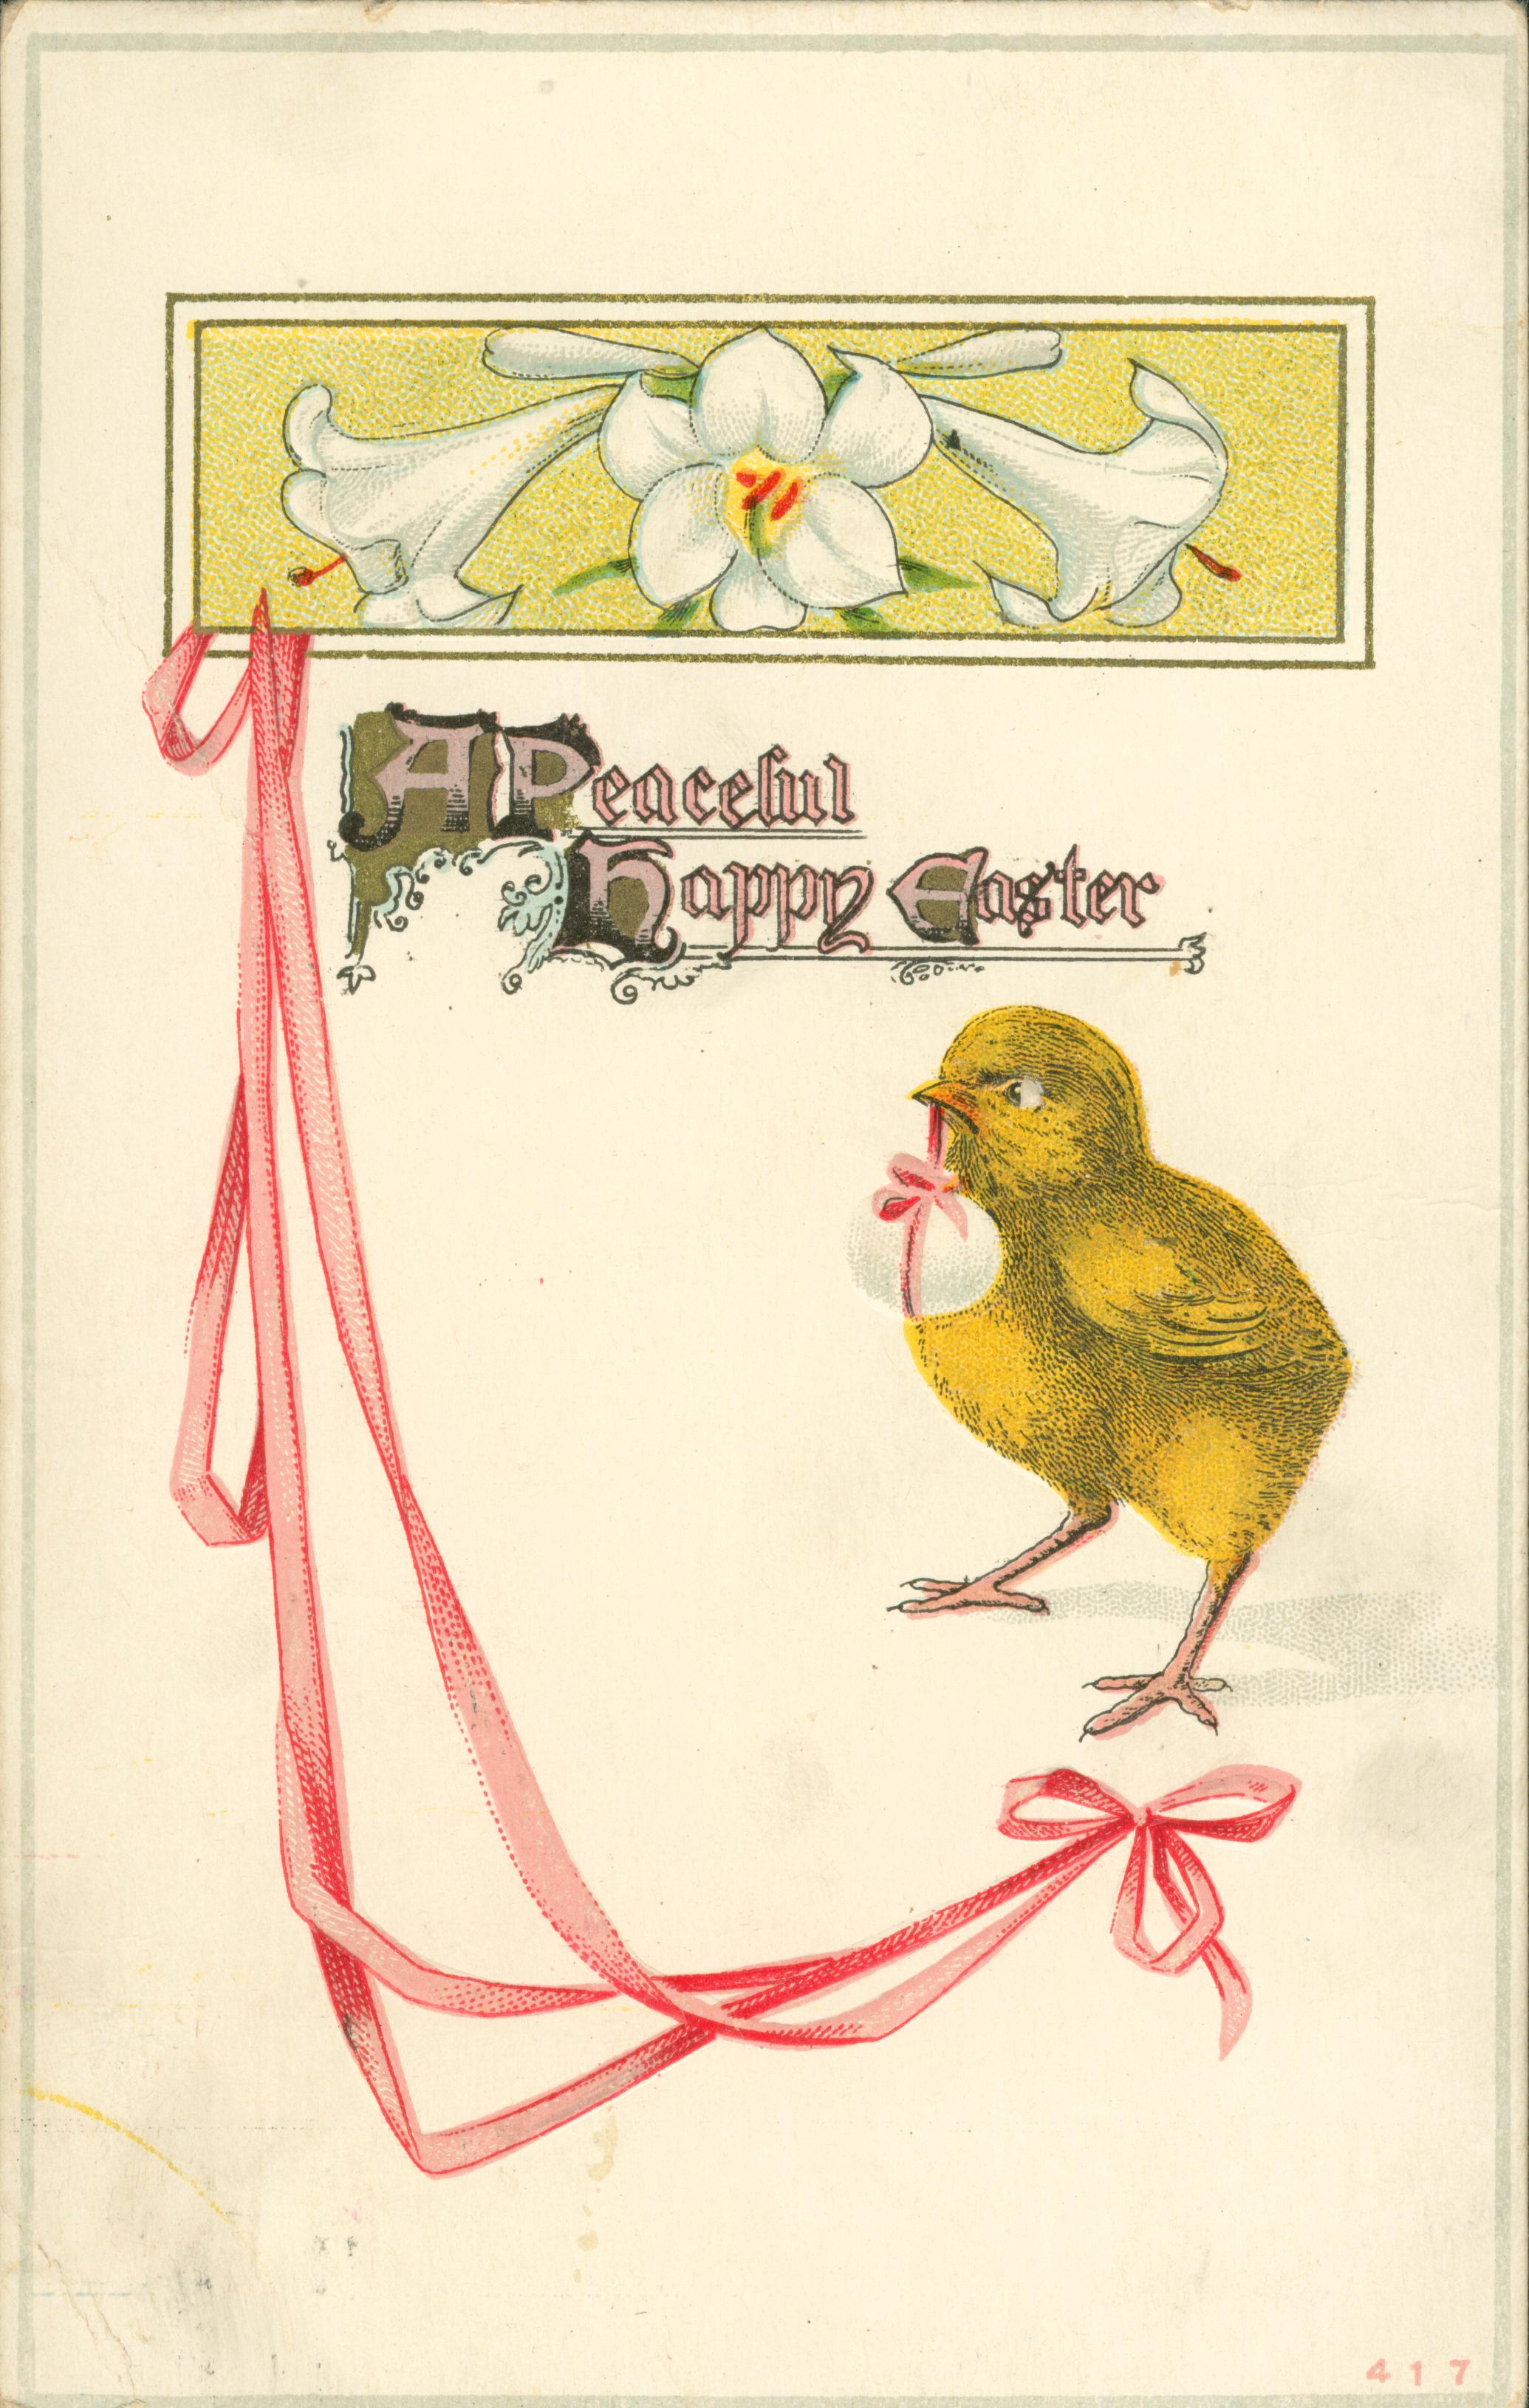 A chick carrying an egg tied in ribbon.